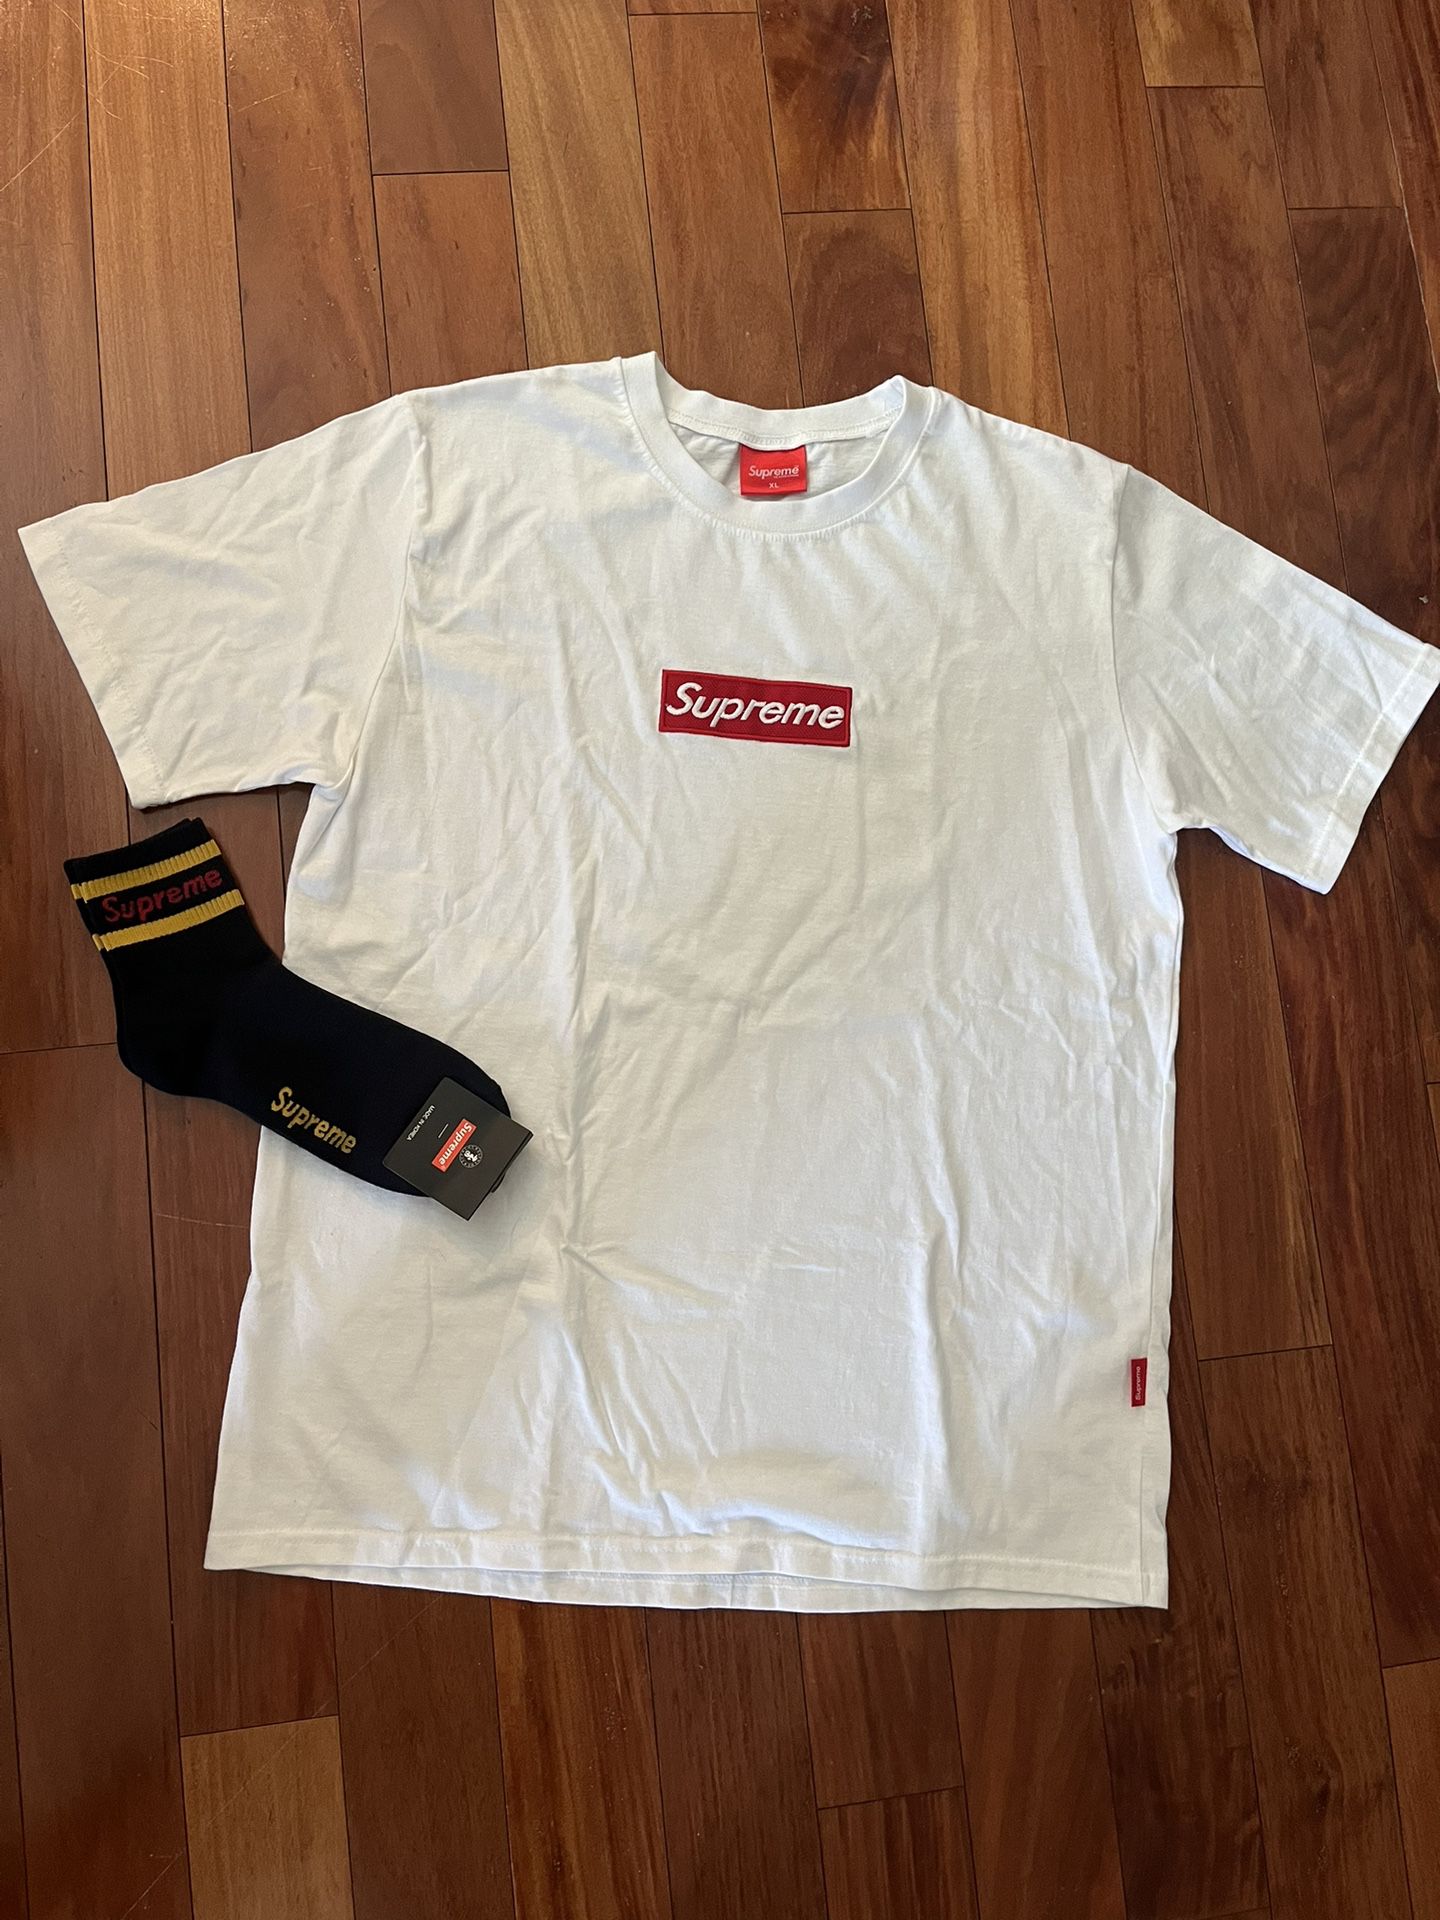 Supreme Shirt & Socks NEW for Sale in San Diego, CA - OfferUp